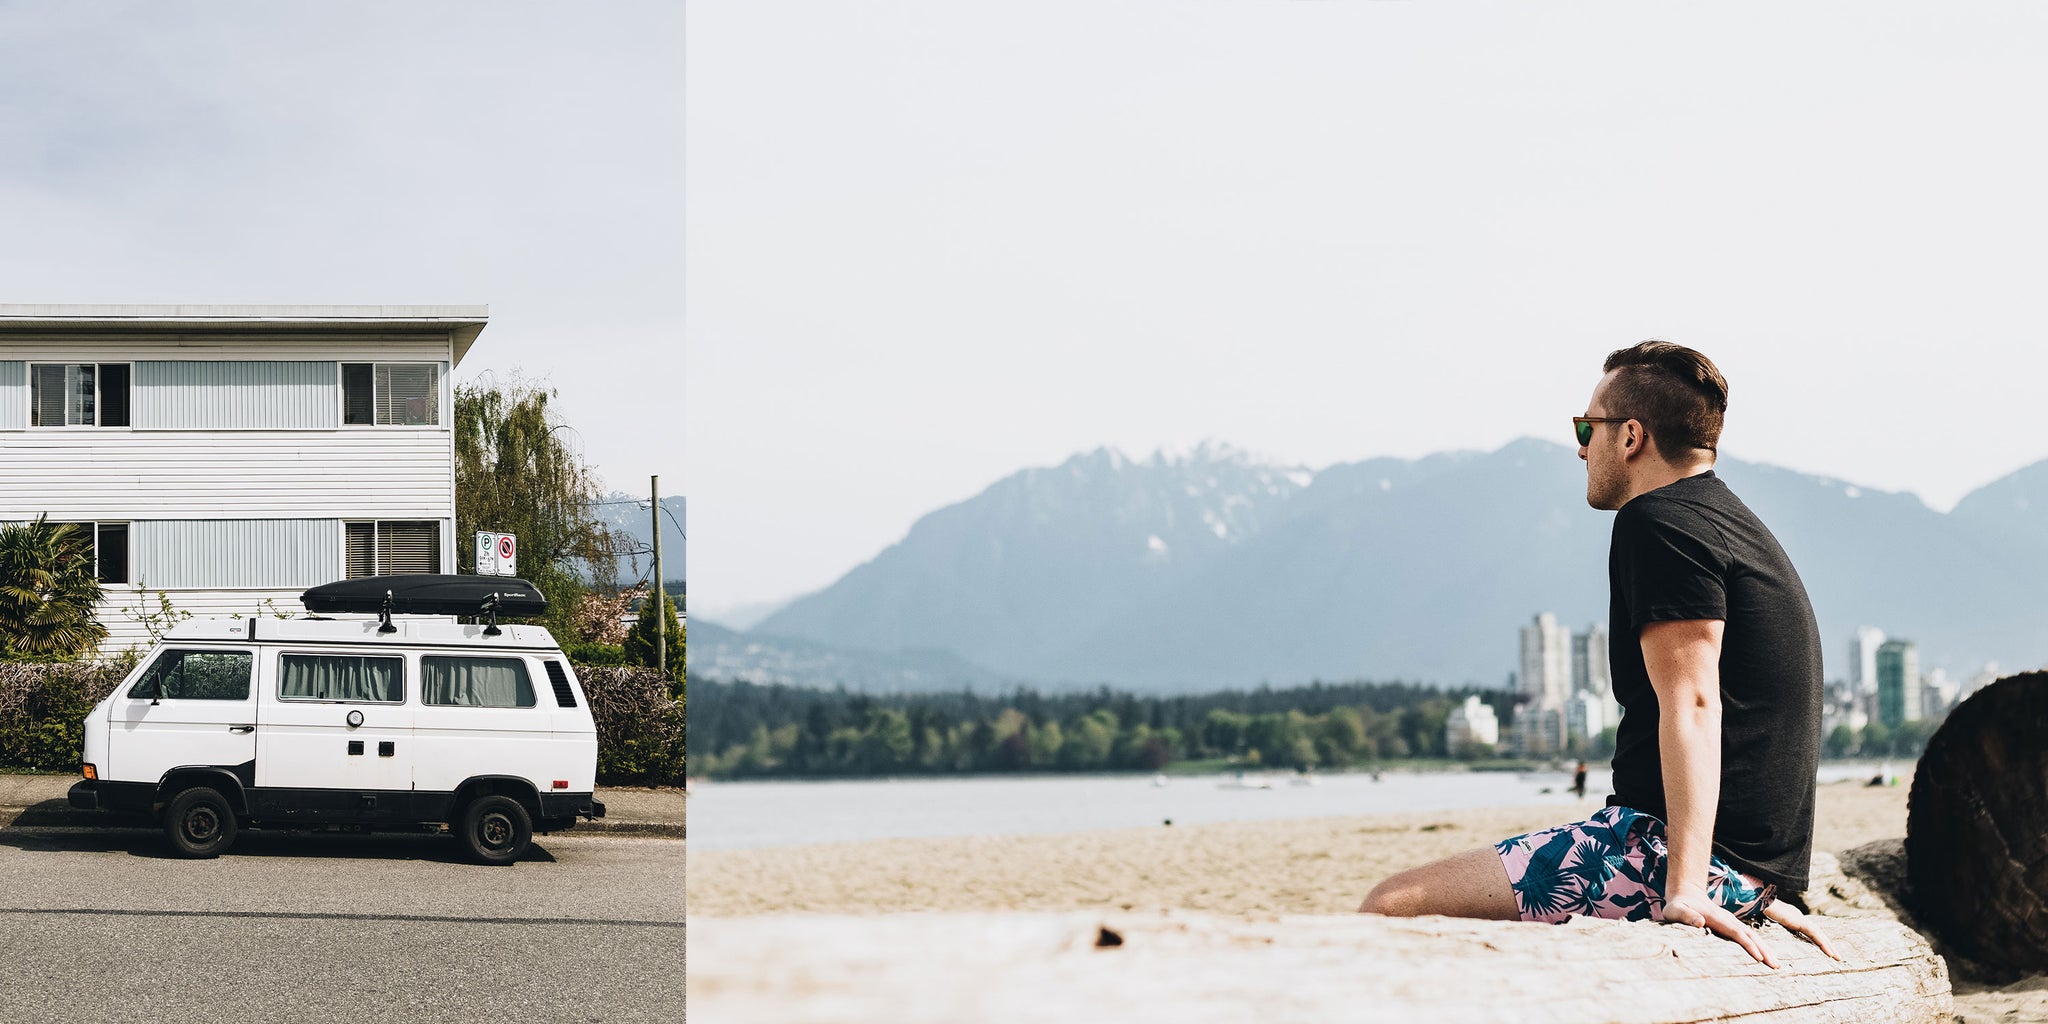 Kitsilano Beach, or Kits beach, in Vancouver with Brandon Lind for Bather